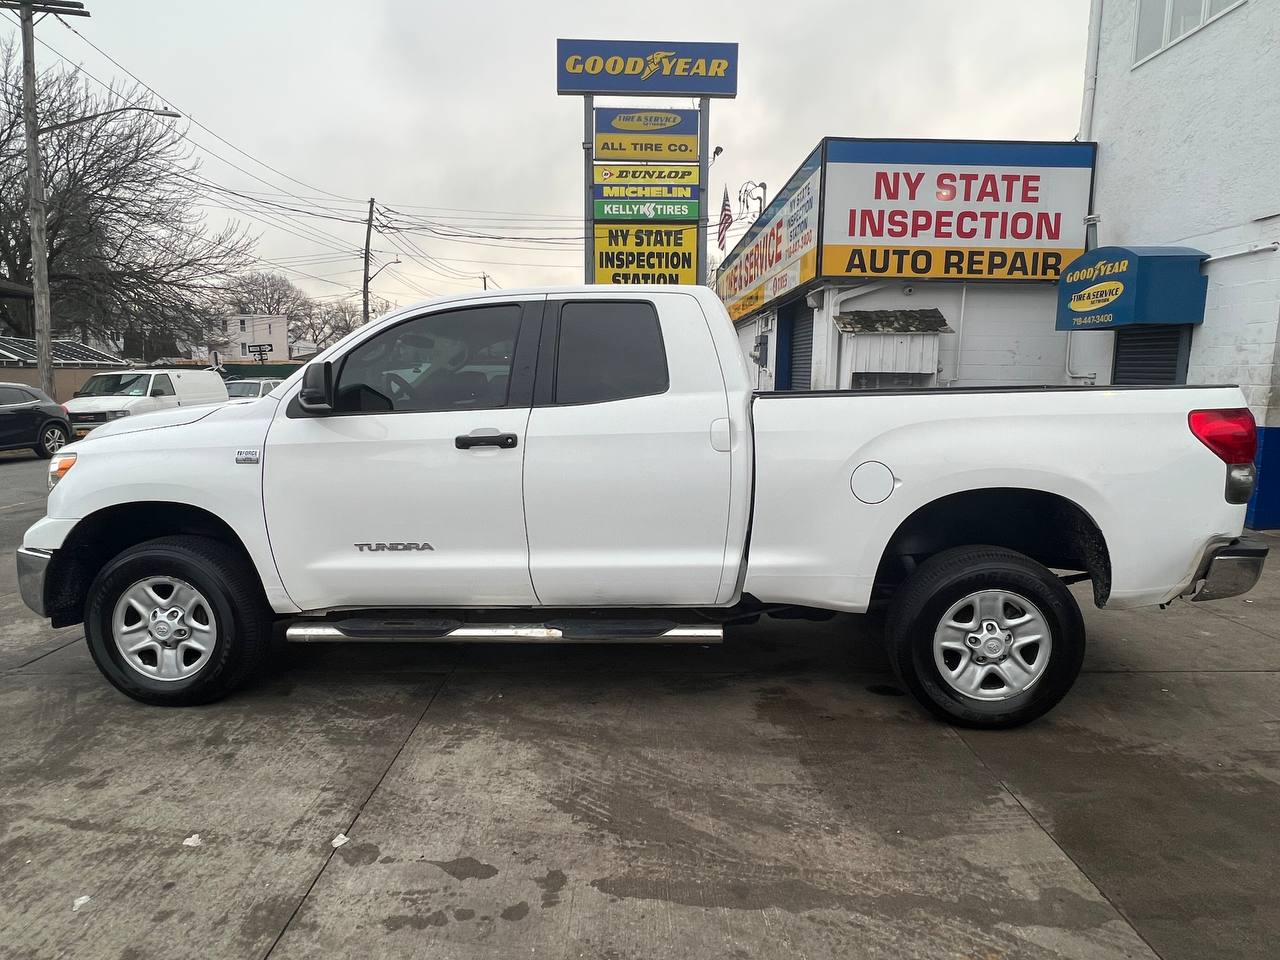 Used - Toyota TUNDRA GRADE Pickup Truck for sale in Staten Island NY